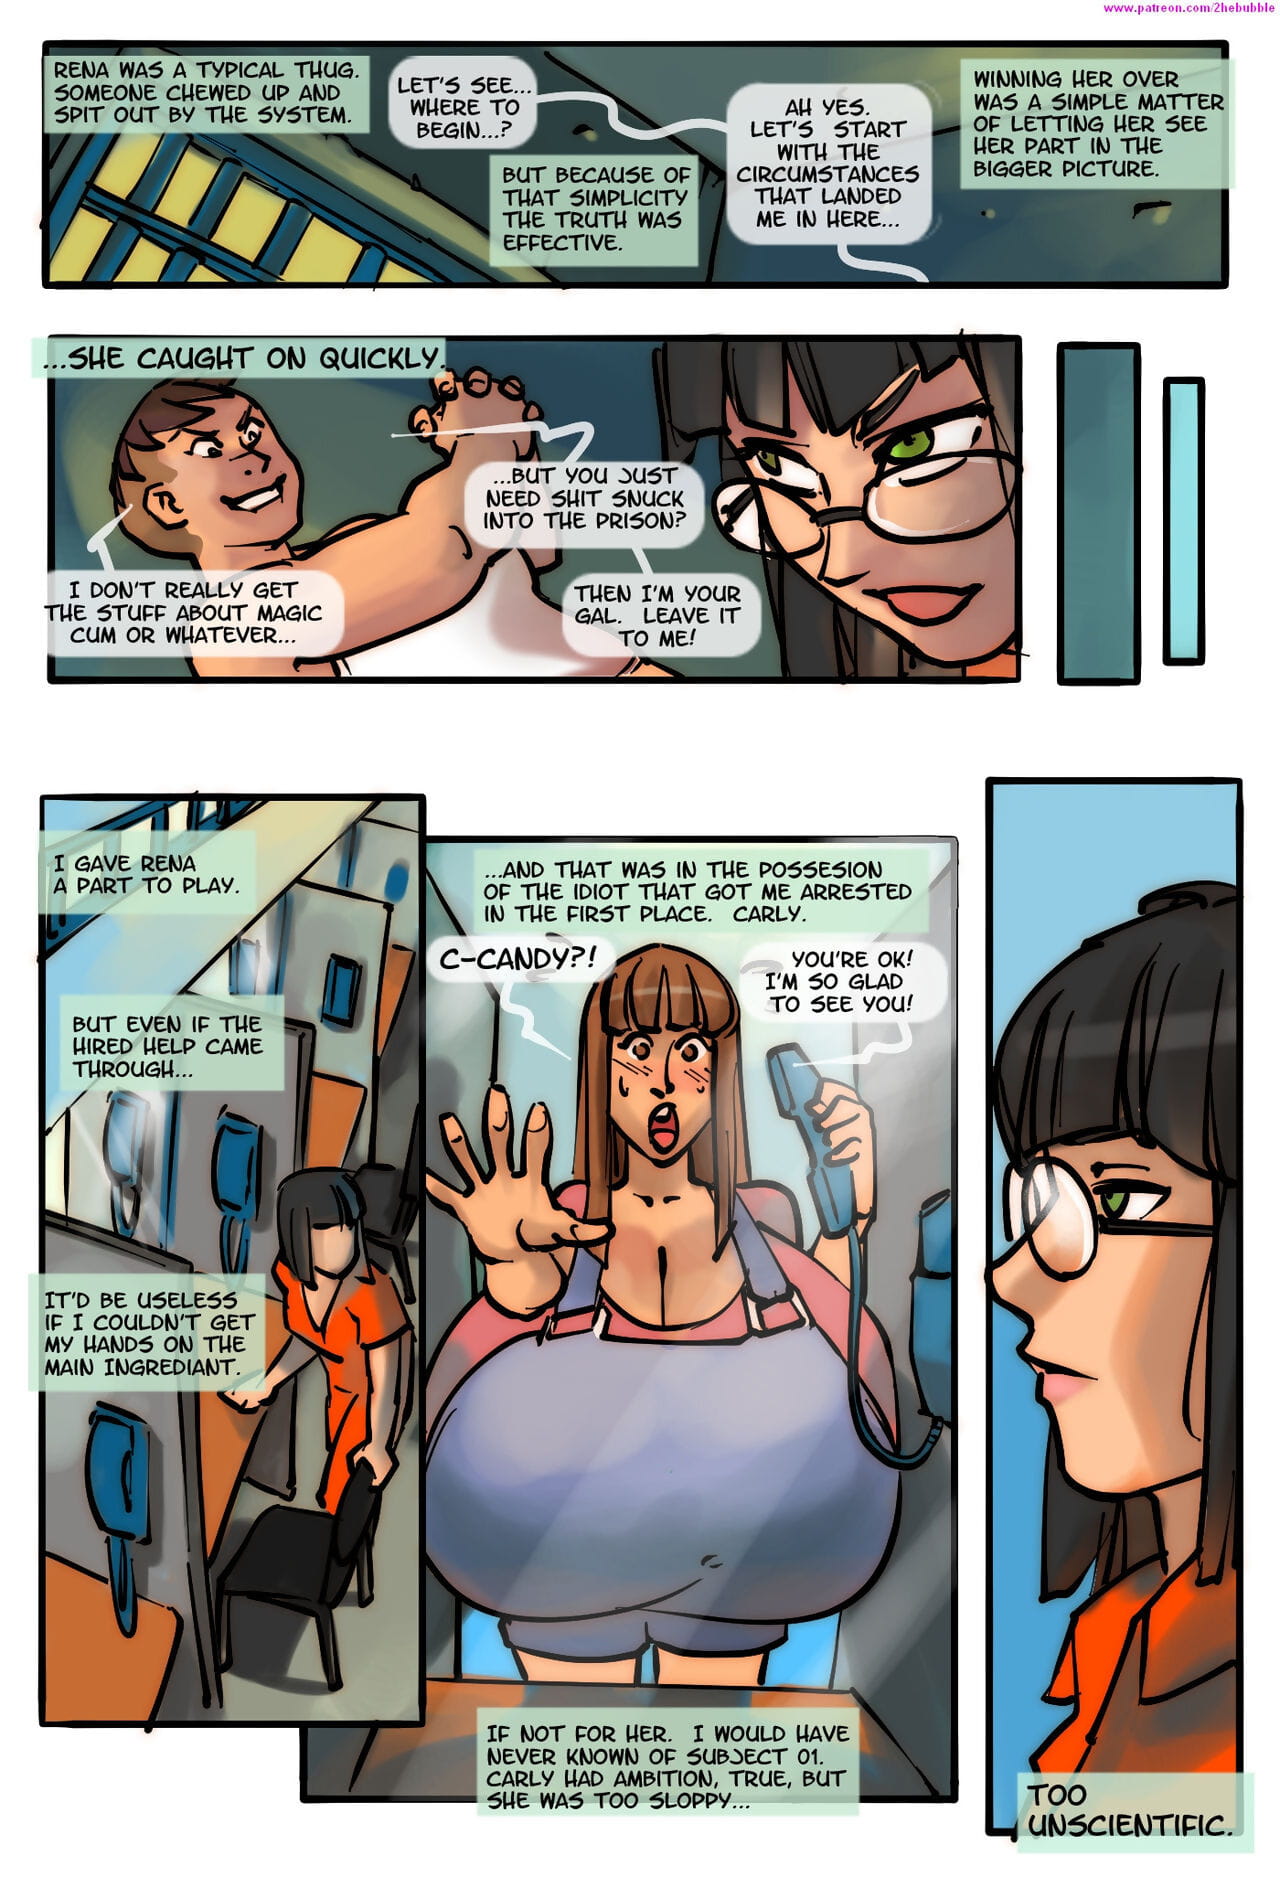 sidneymt dacht bubble #1 page 1